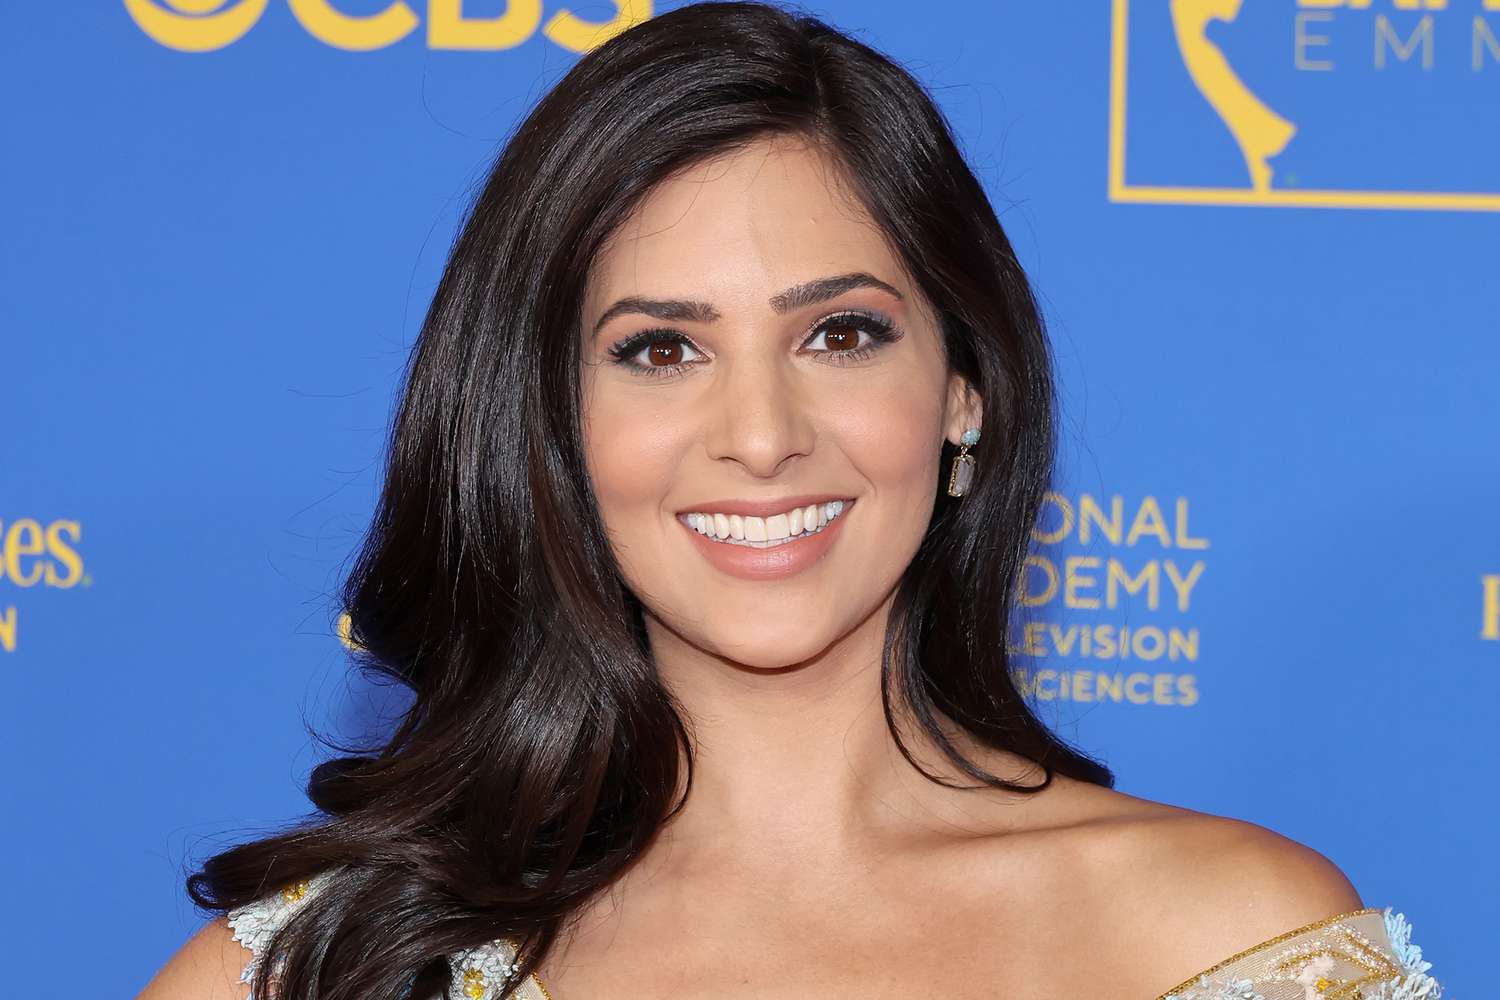 Camila Banus Appears to Call Out Former 'Days of Our Lives' Colleagues’ 'Behavior' After Exit from the Show